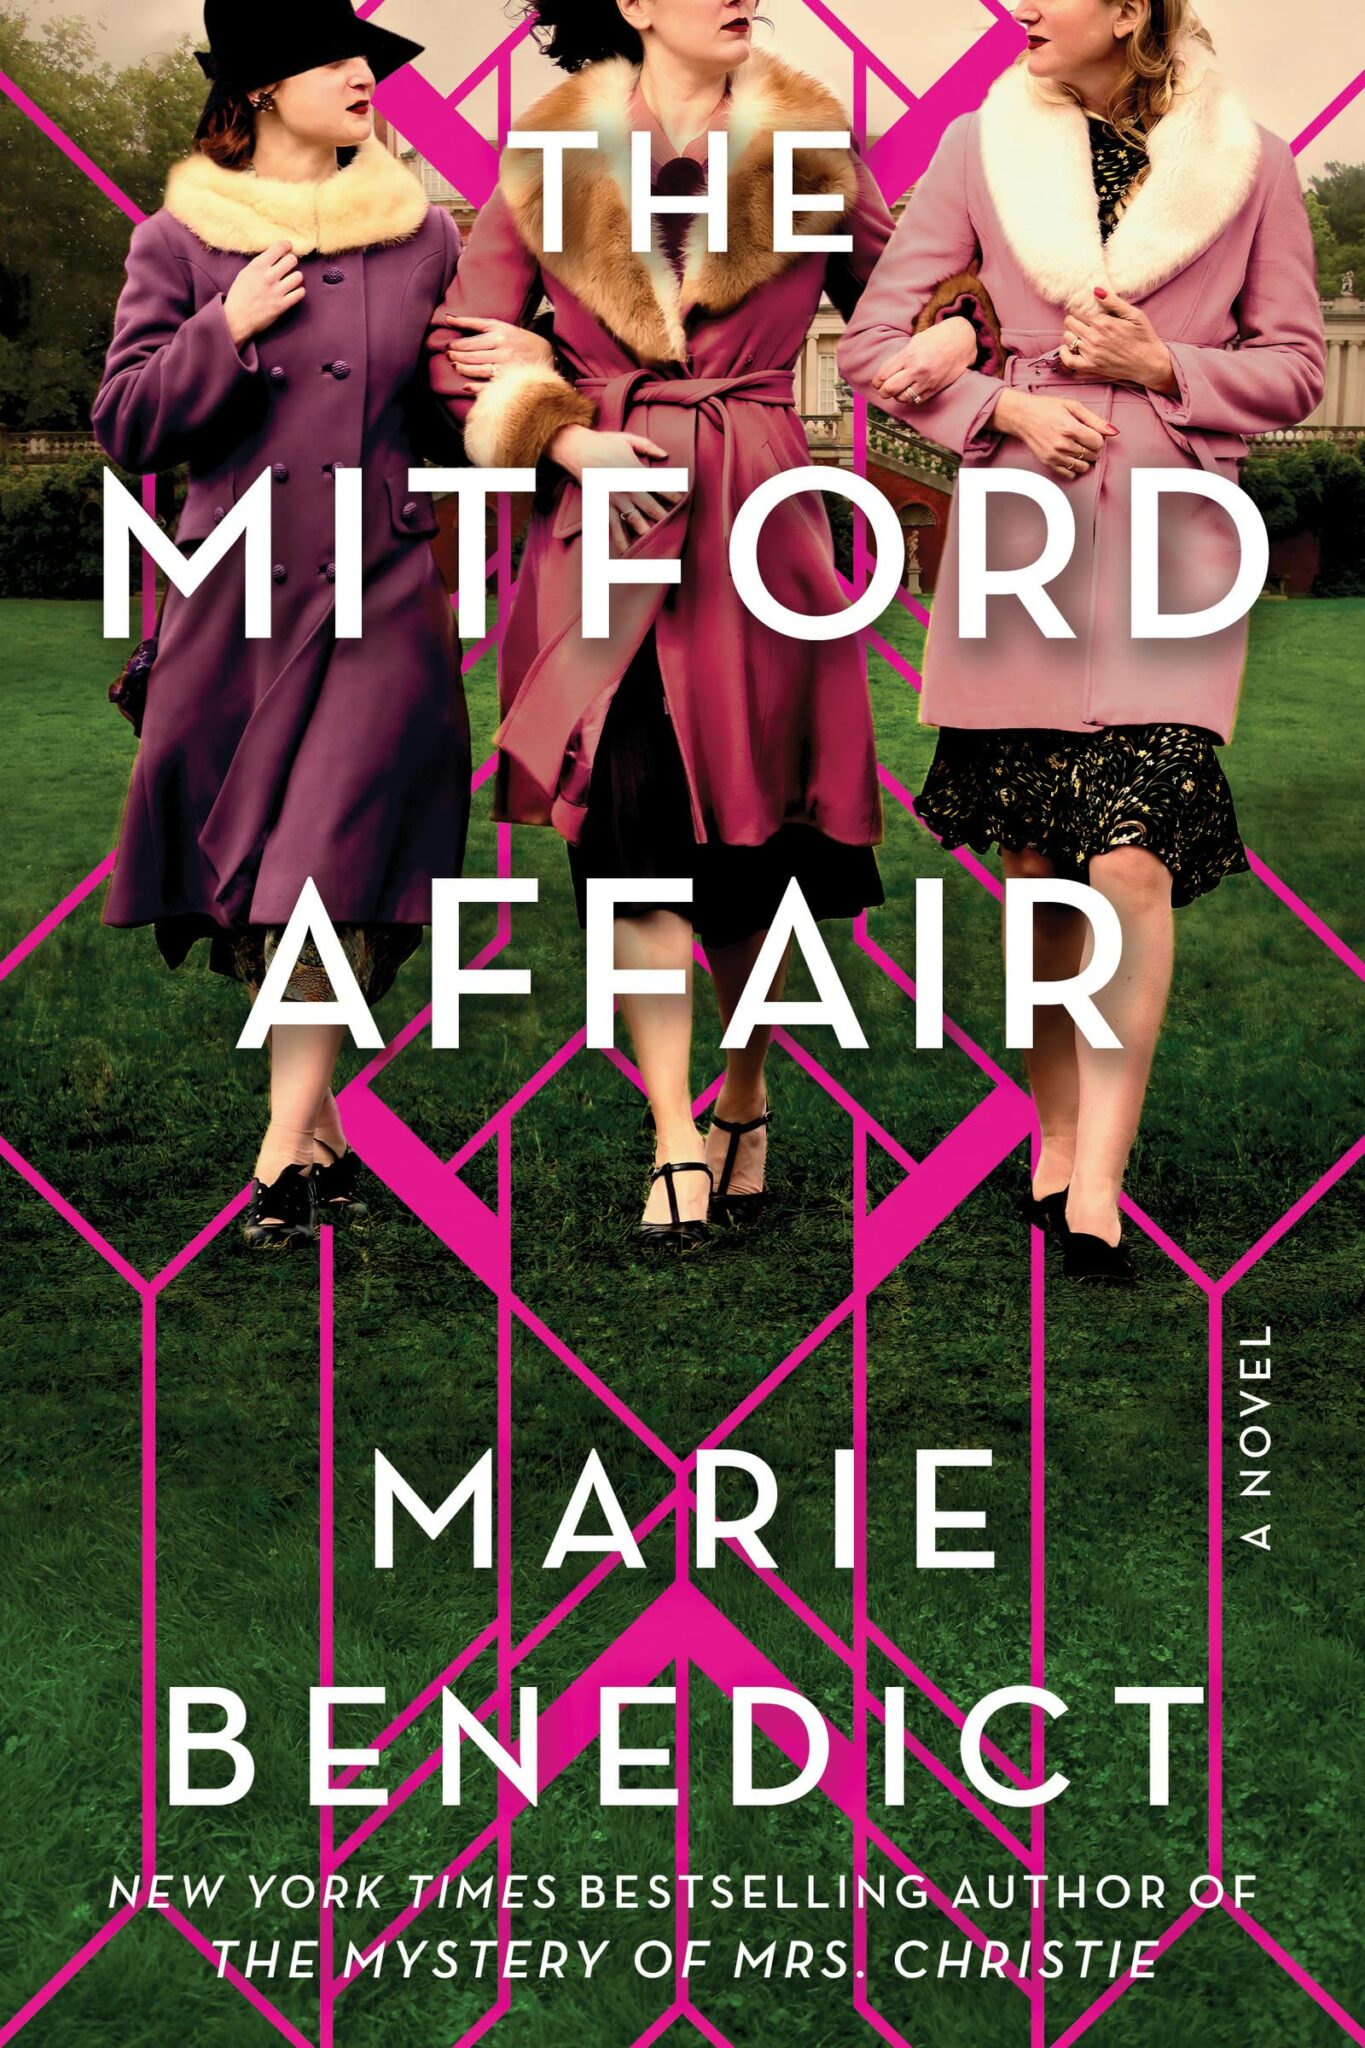 The Mitford Affair Marie Benedict 2024 Release Check Reads